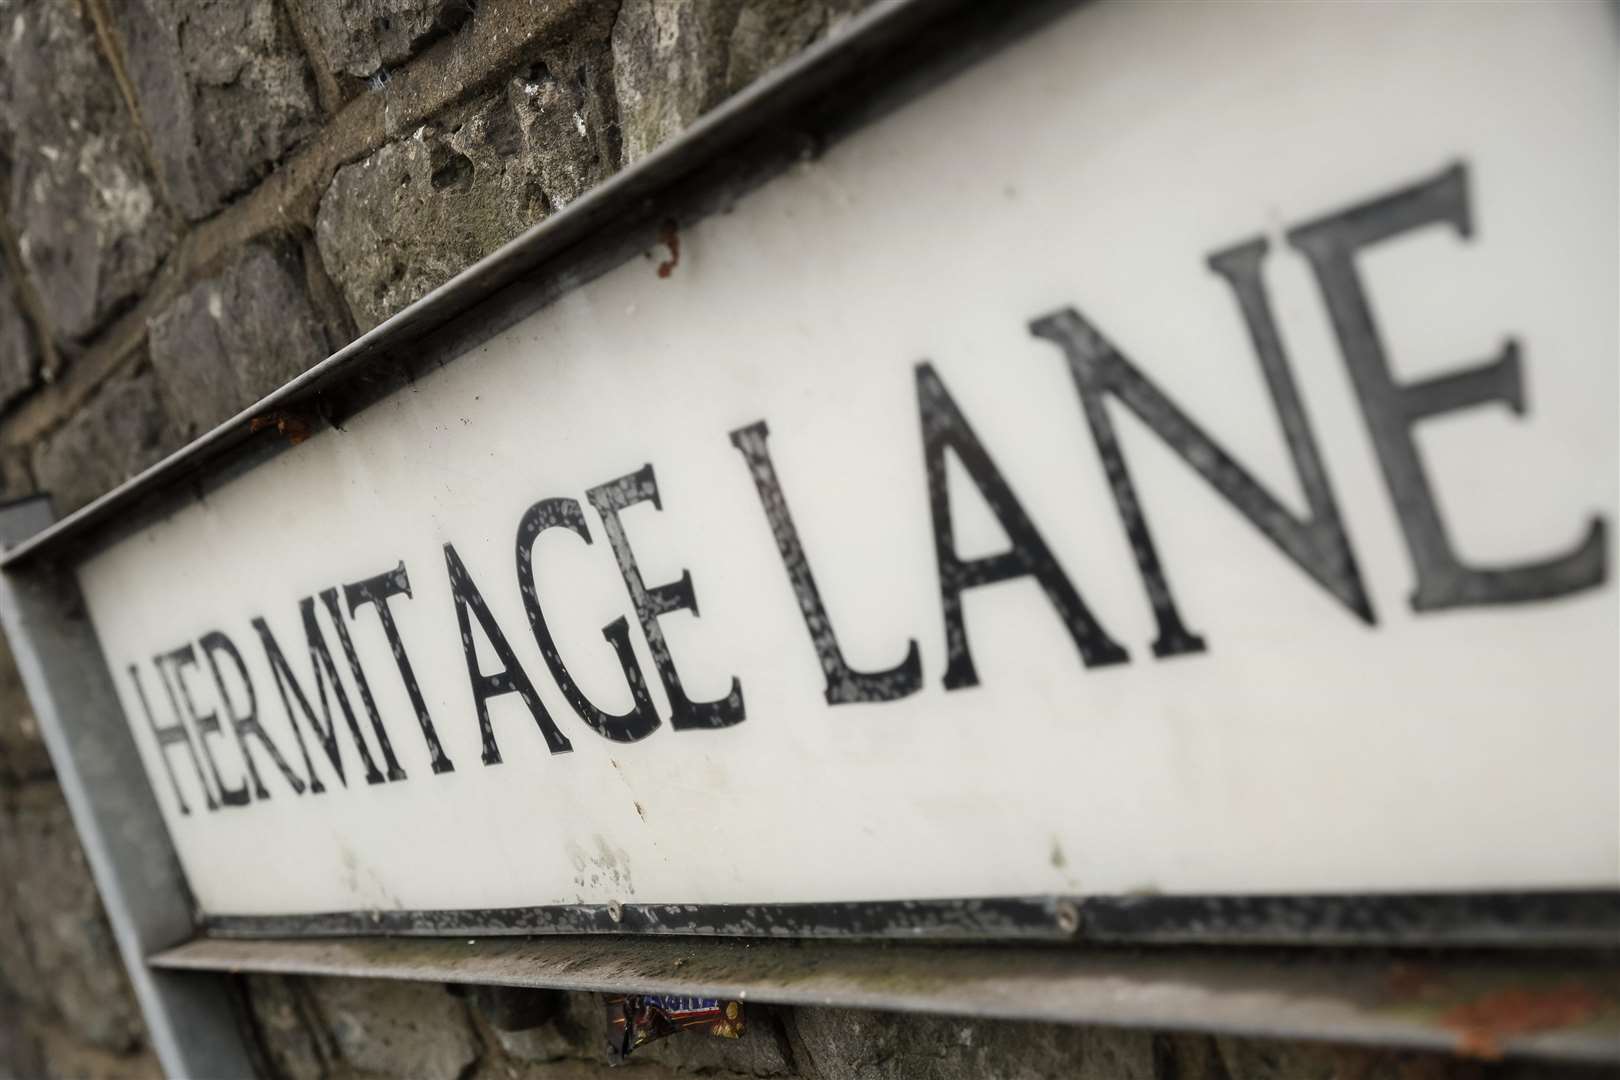 No relief for Hermitage Lane